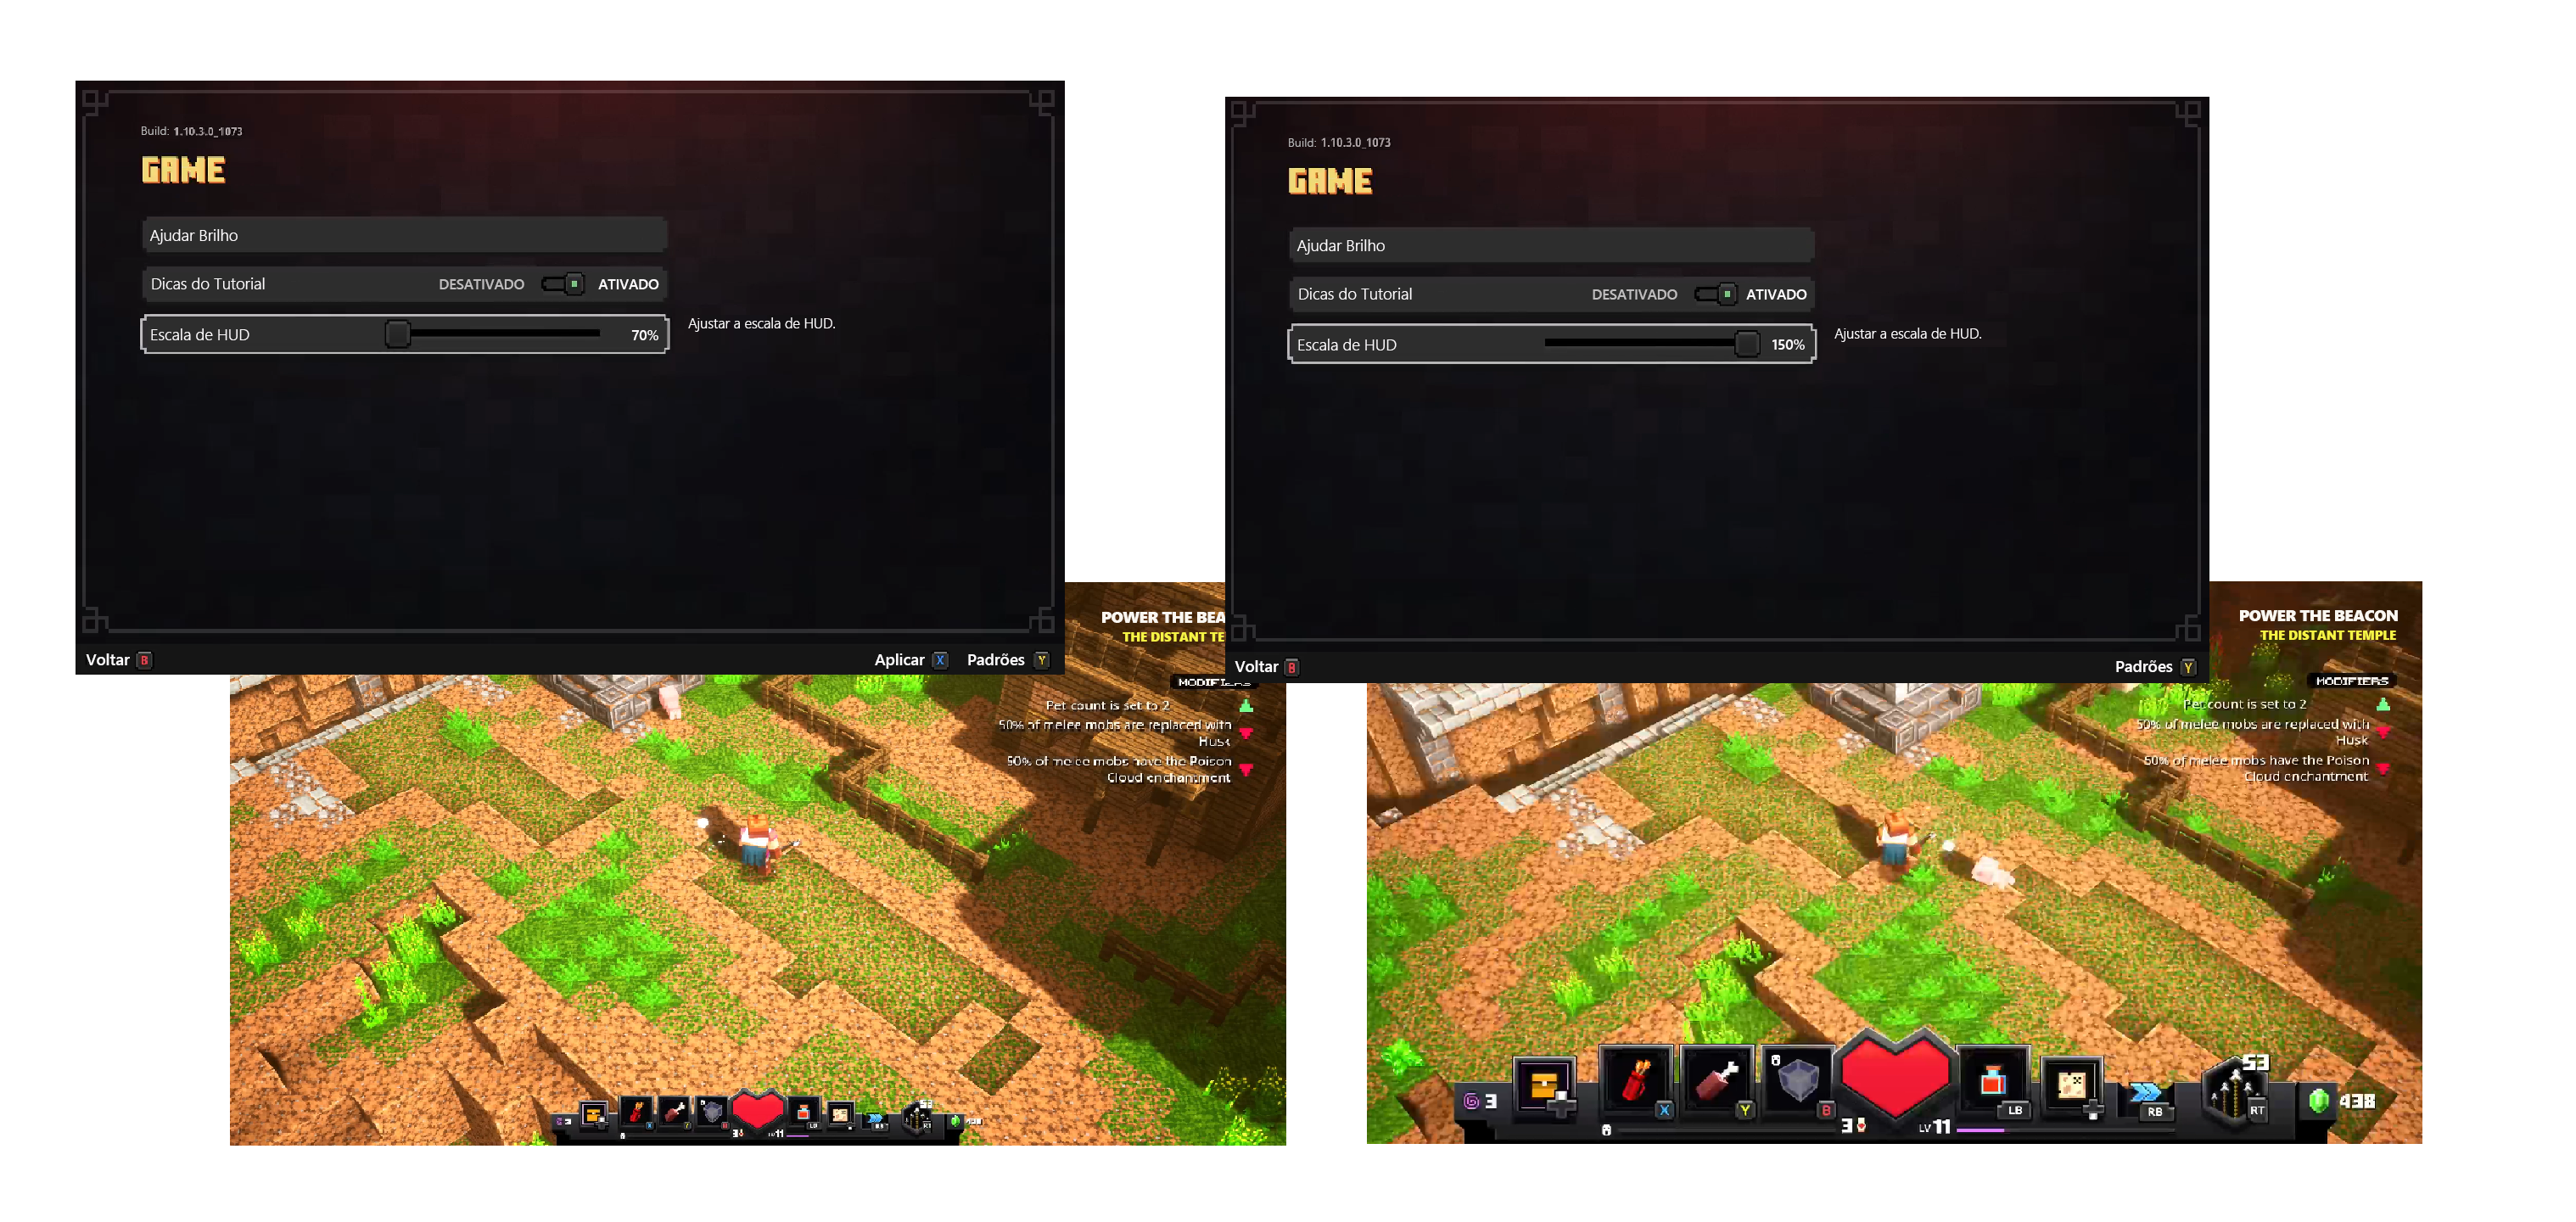 Two sets of screenshots from Minecraft Dungeons demonstrate how the Hud Scale setting can be set from 70% to 150%.